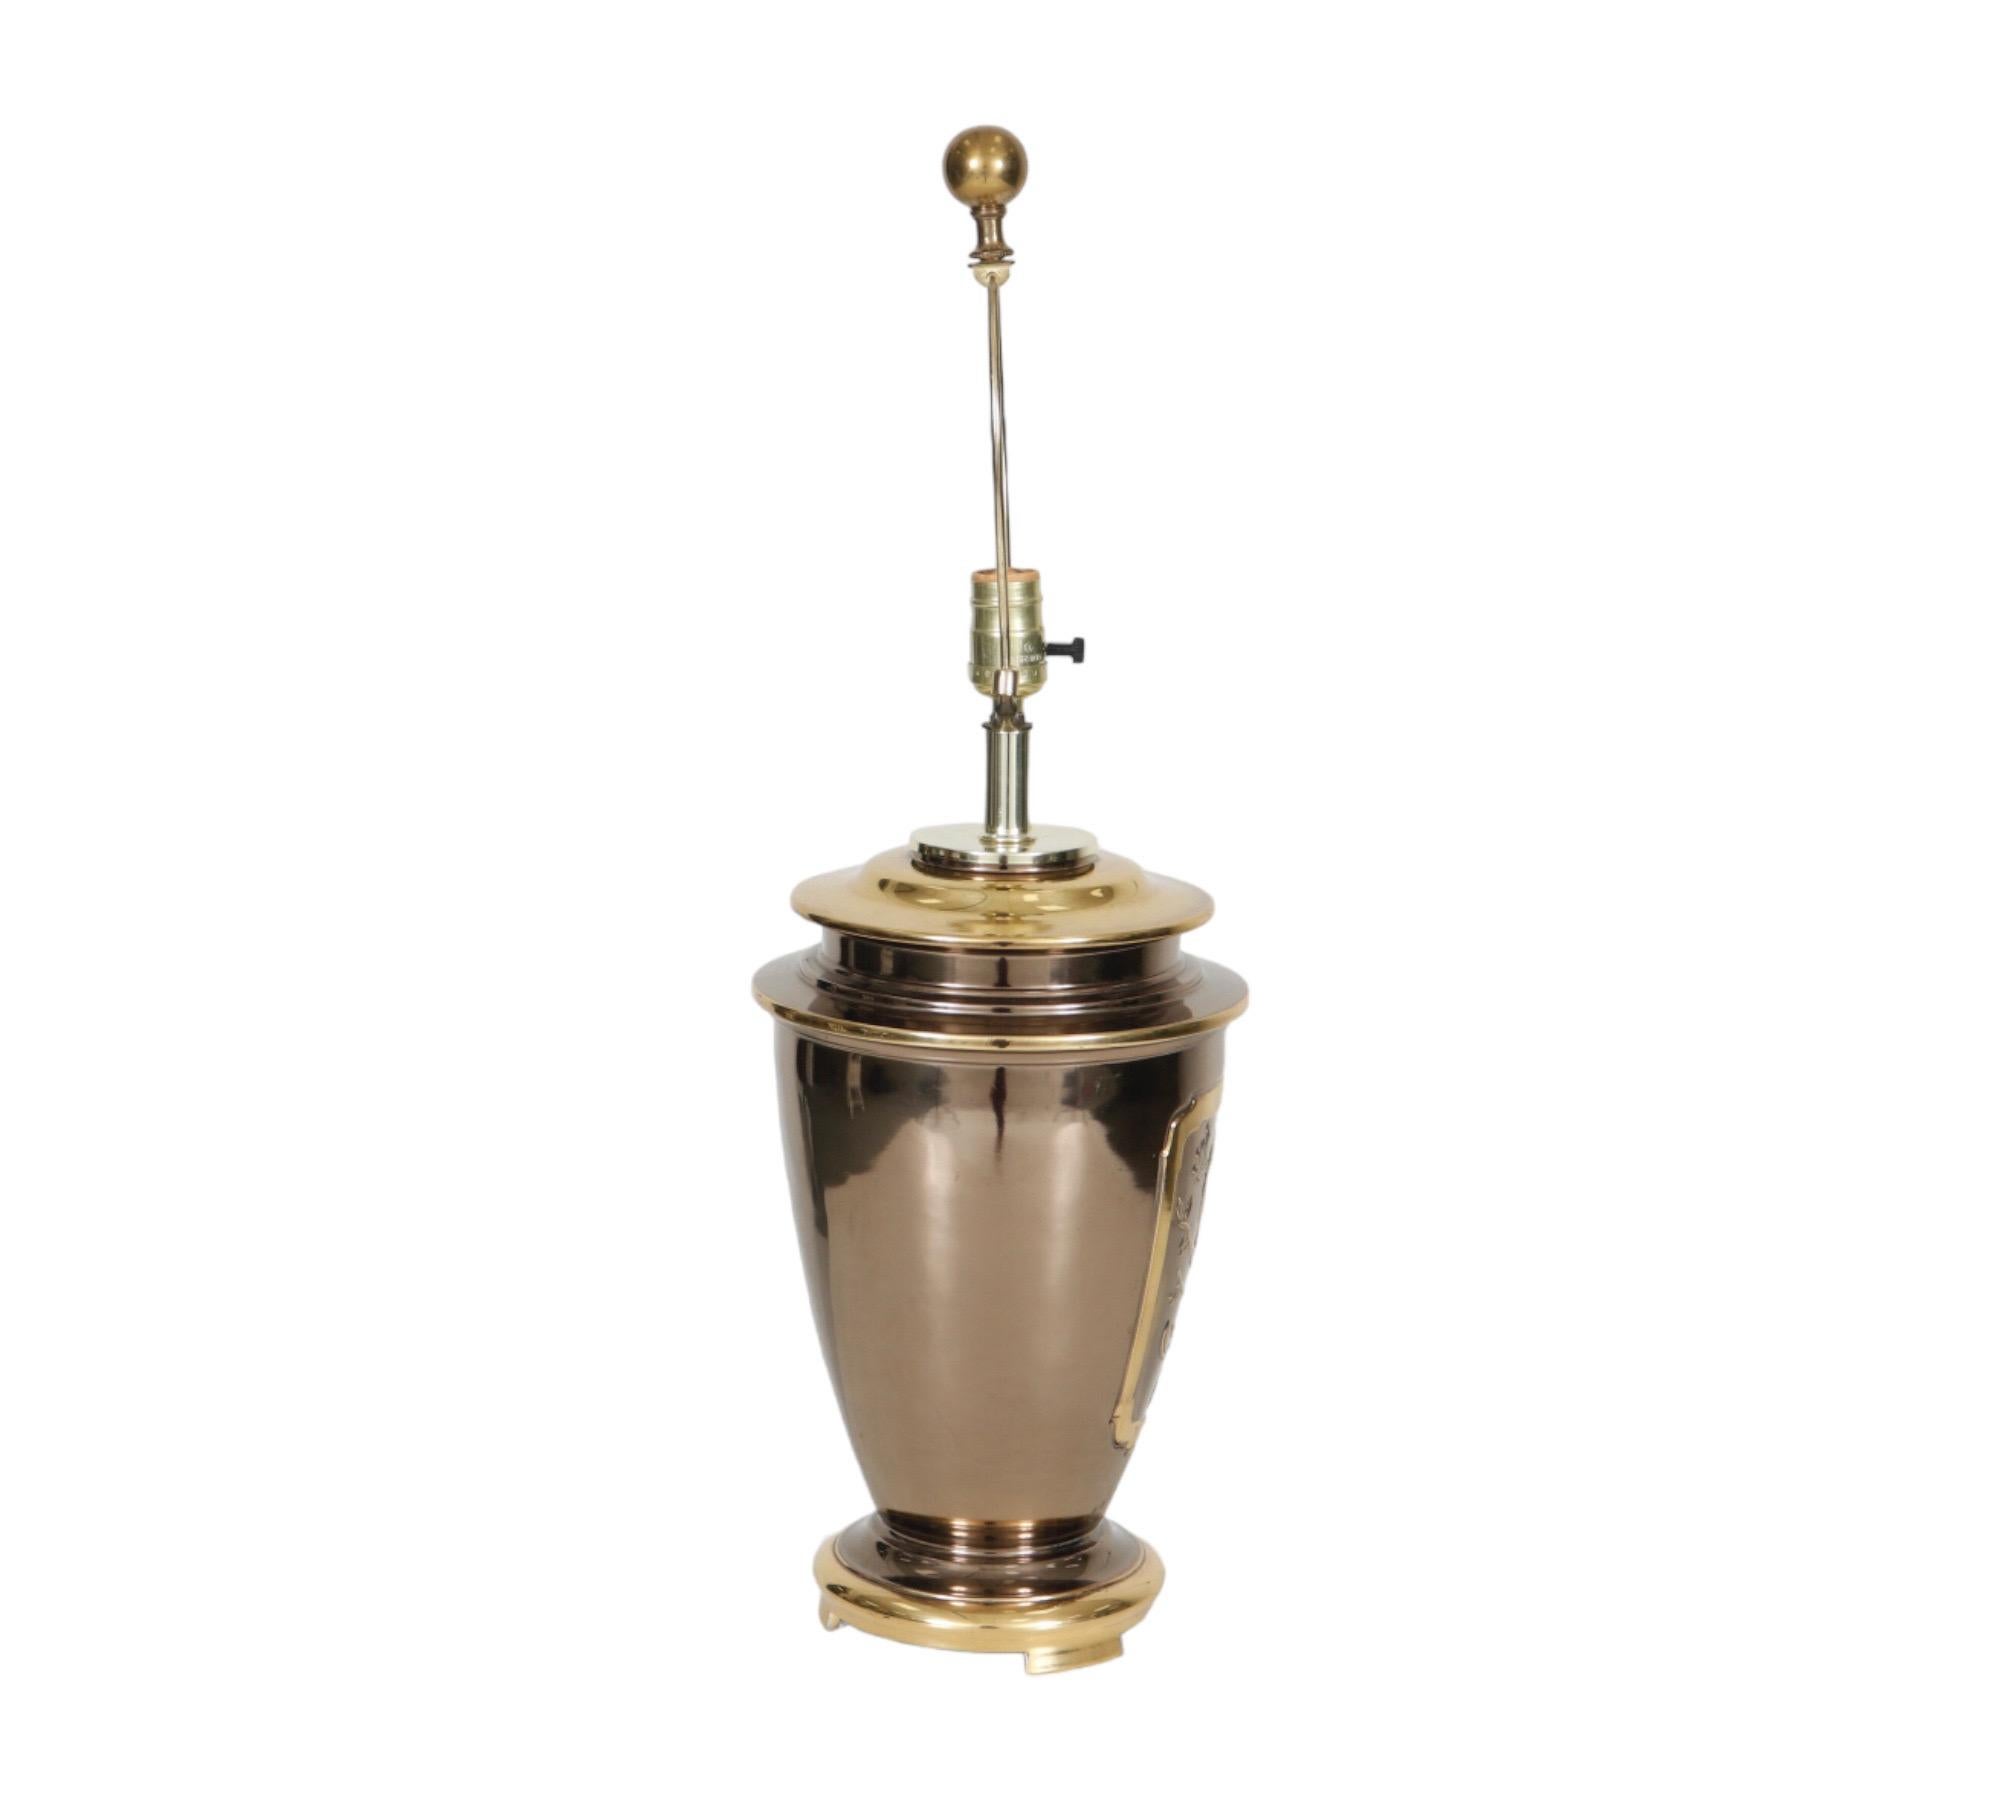 A burnished brass urn shaped table lamp. The front is decorated with an embossed shield that depicts a peacock on a branch mid-song. The round base is beveled with three block feet. Measure 9